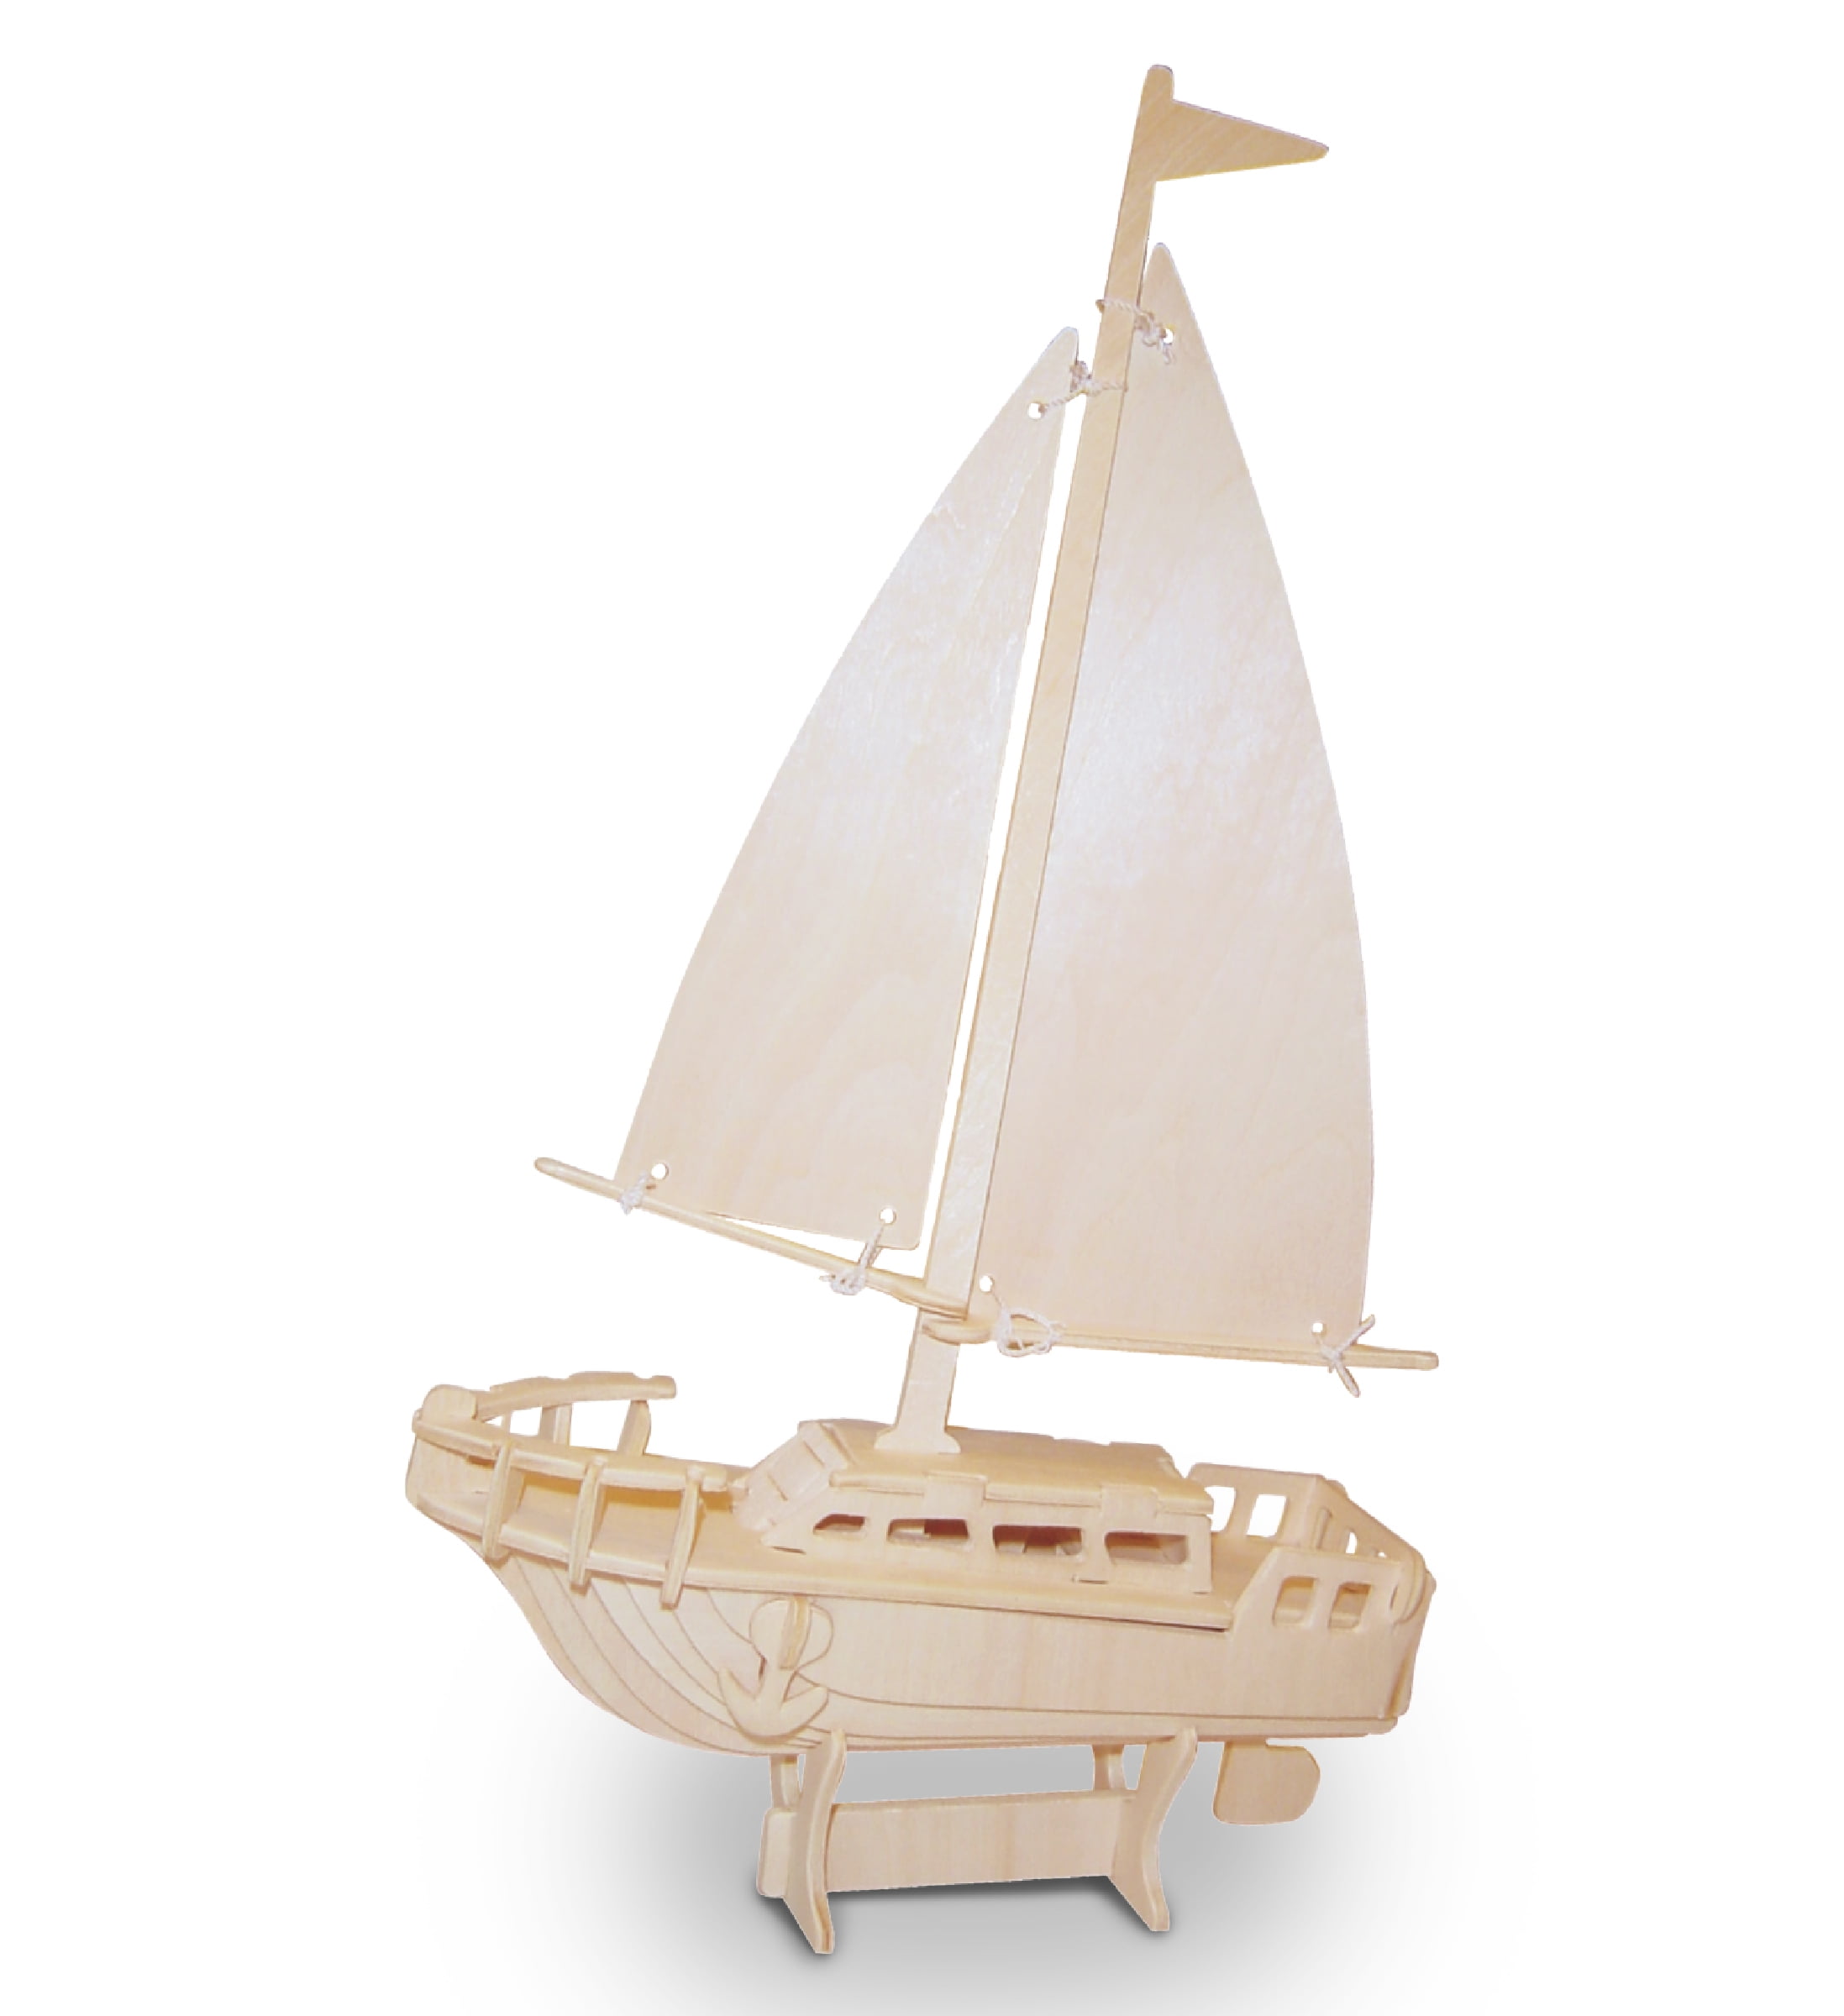 Wooden Sailing Boat 3D Model DIY Kits Educational Assembly Ship Toy Home Decor 